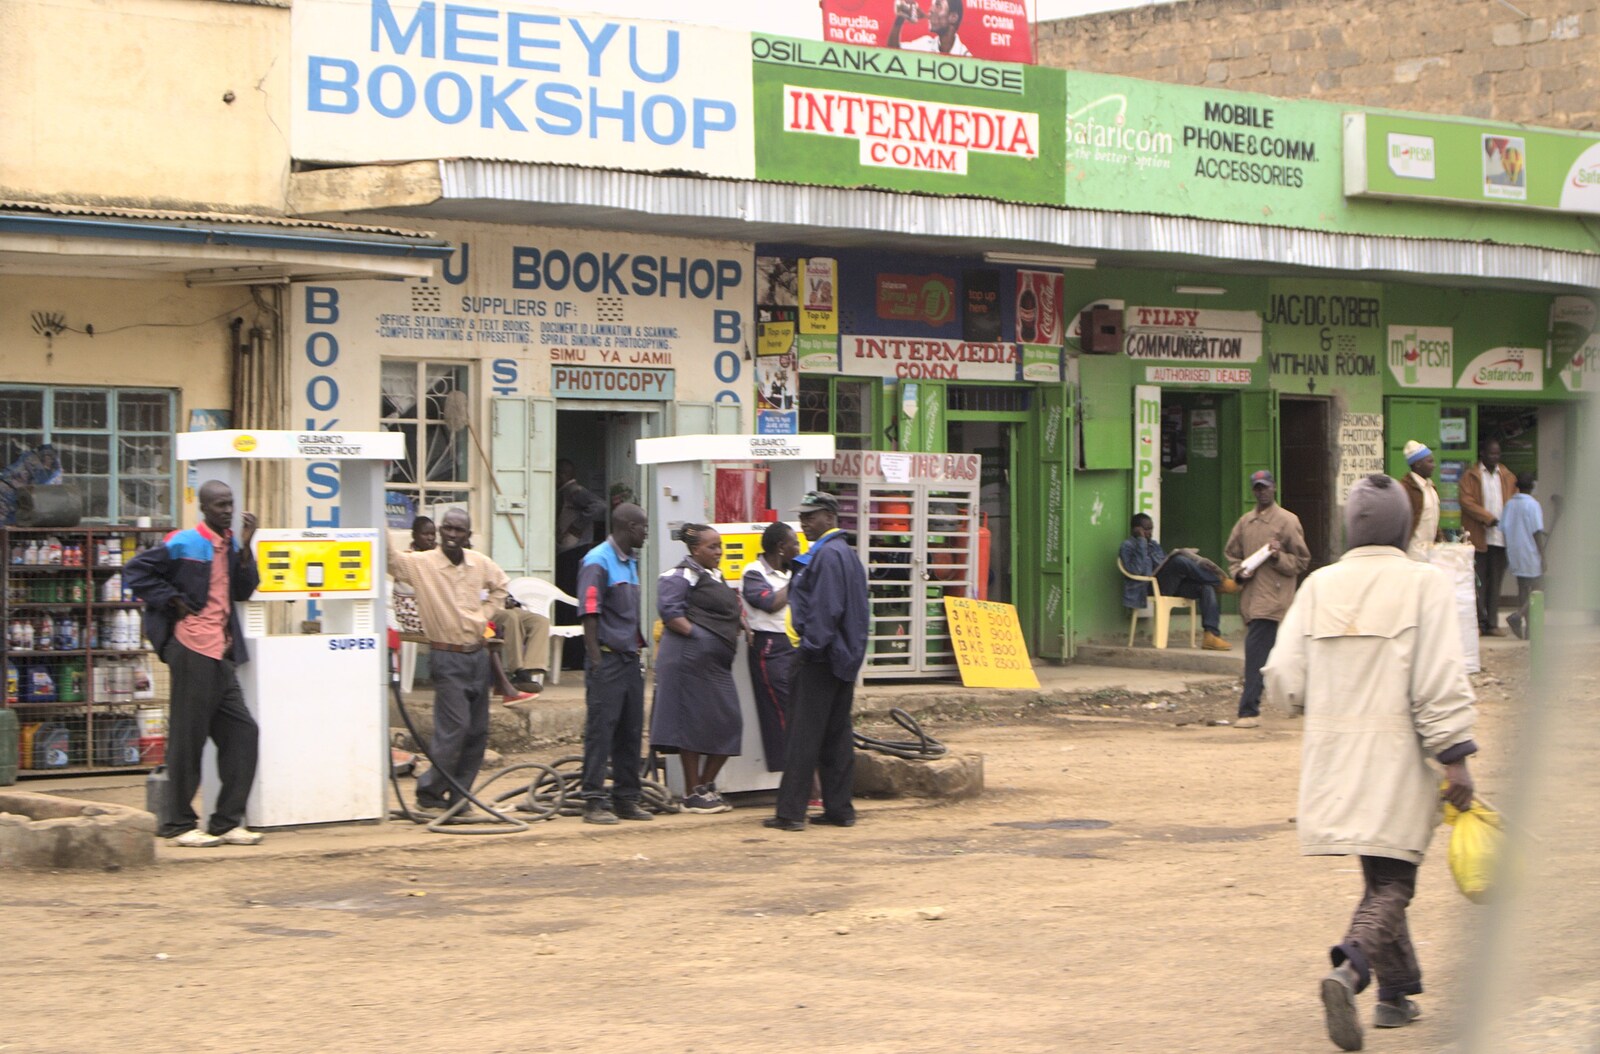 A petrol station by the Meeyu Bookshop from Narok to Naivasha and Hell's Gate National Park, Kenya, Africa - 5th November 2010